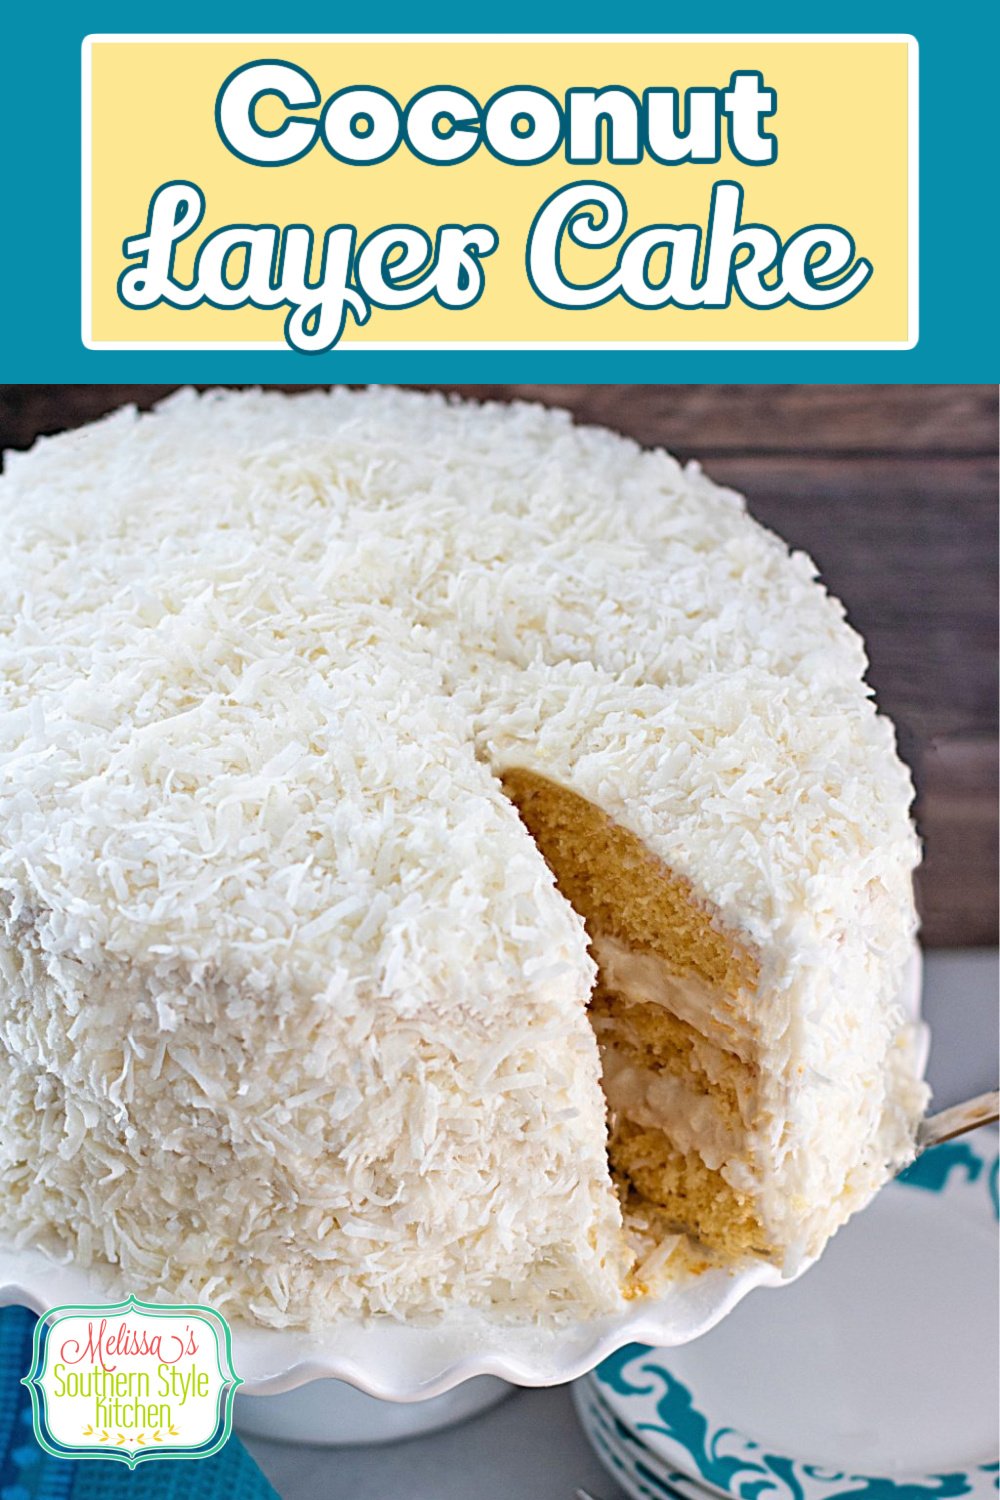 This glorious Coconut Layer Cake is a stunner worthy of any special gathering, birthday or holiday celebration #coconutcake #coconutlayercake #cakerecipes #easterdesserts #cakes #birthdaycakerecipes #southerndesserts #southernrecipes